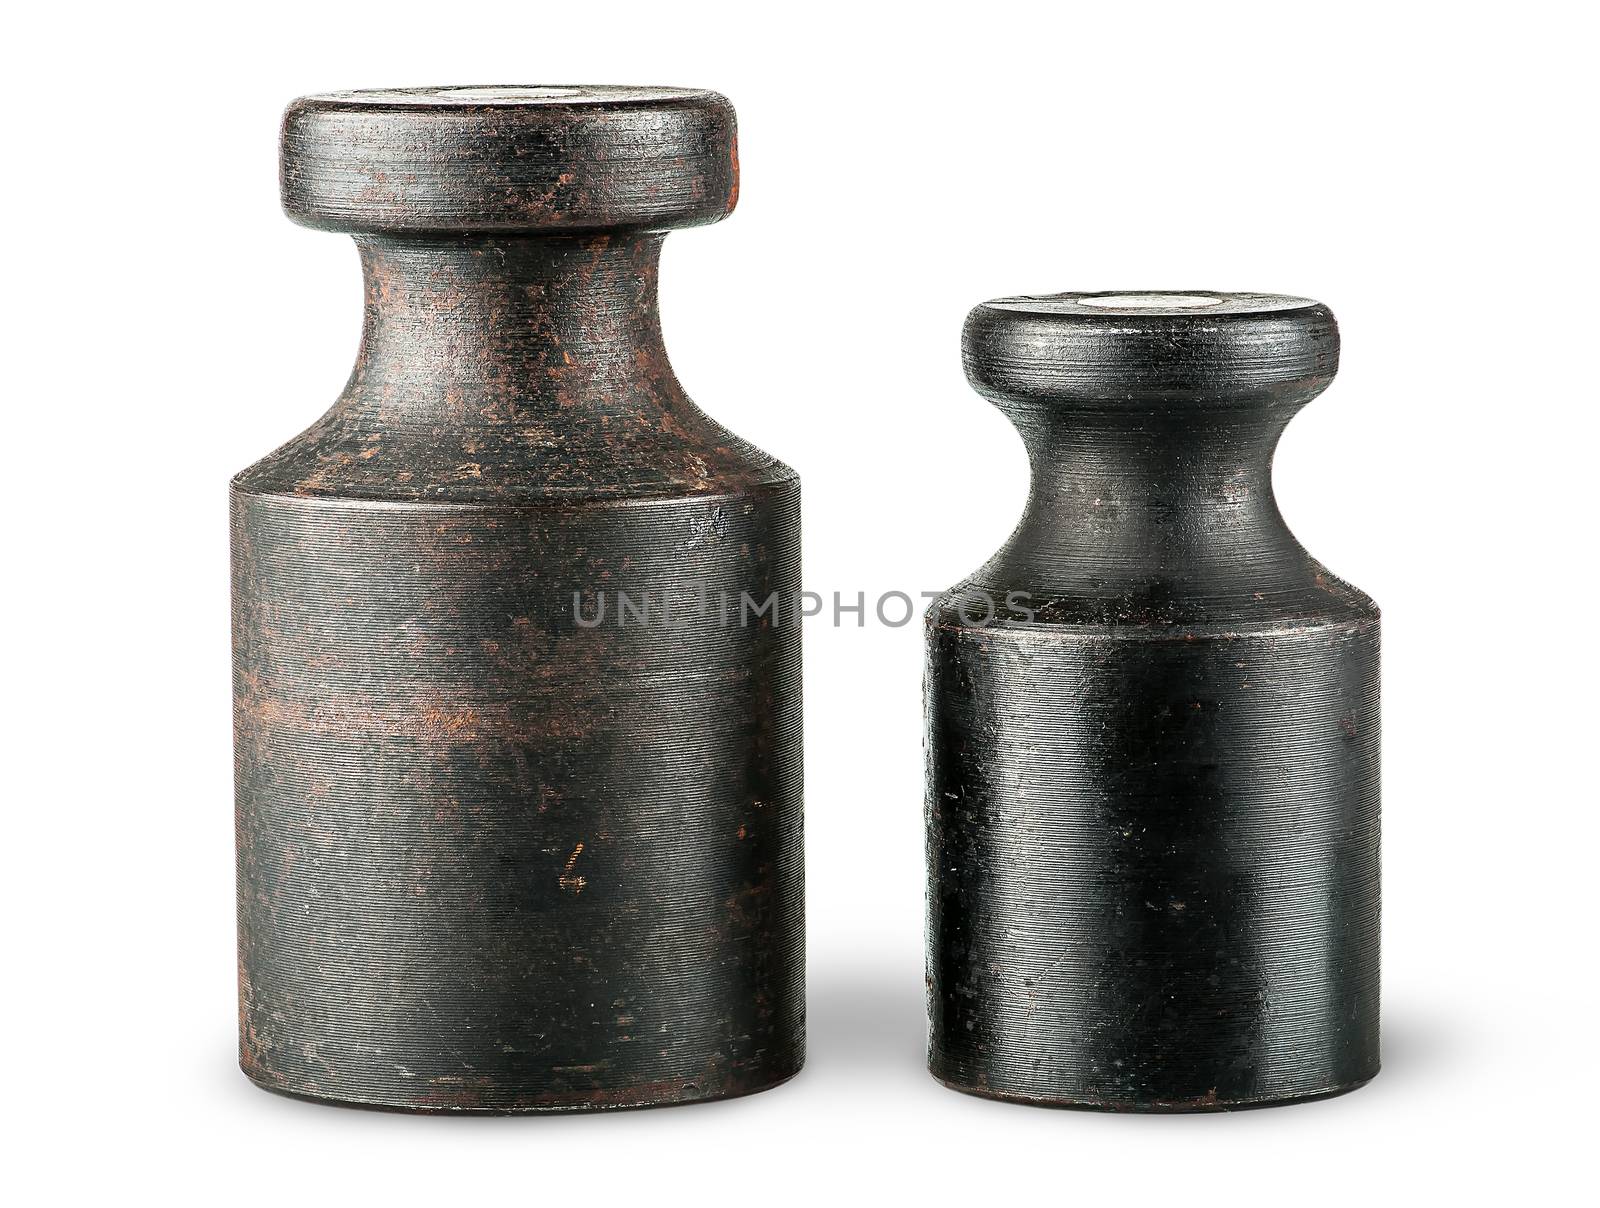 Two old rusty scale weights isolated on white background